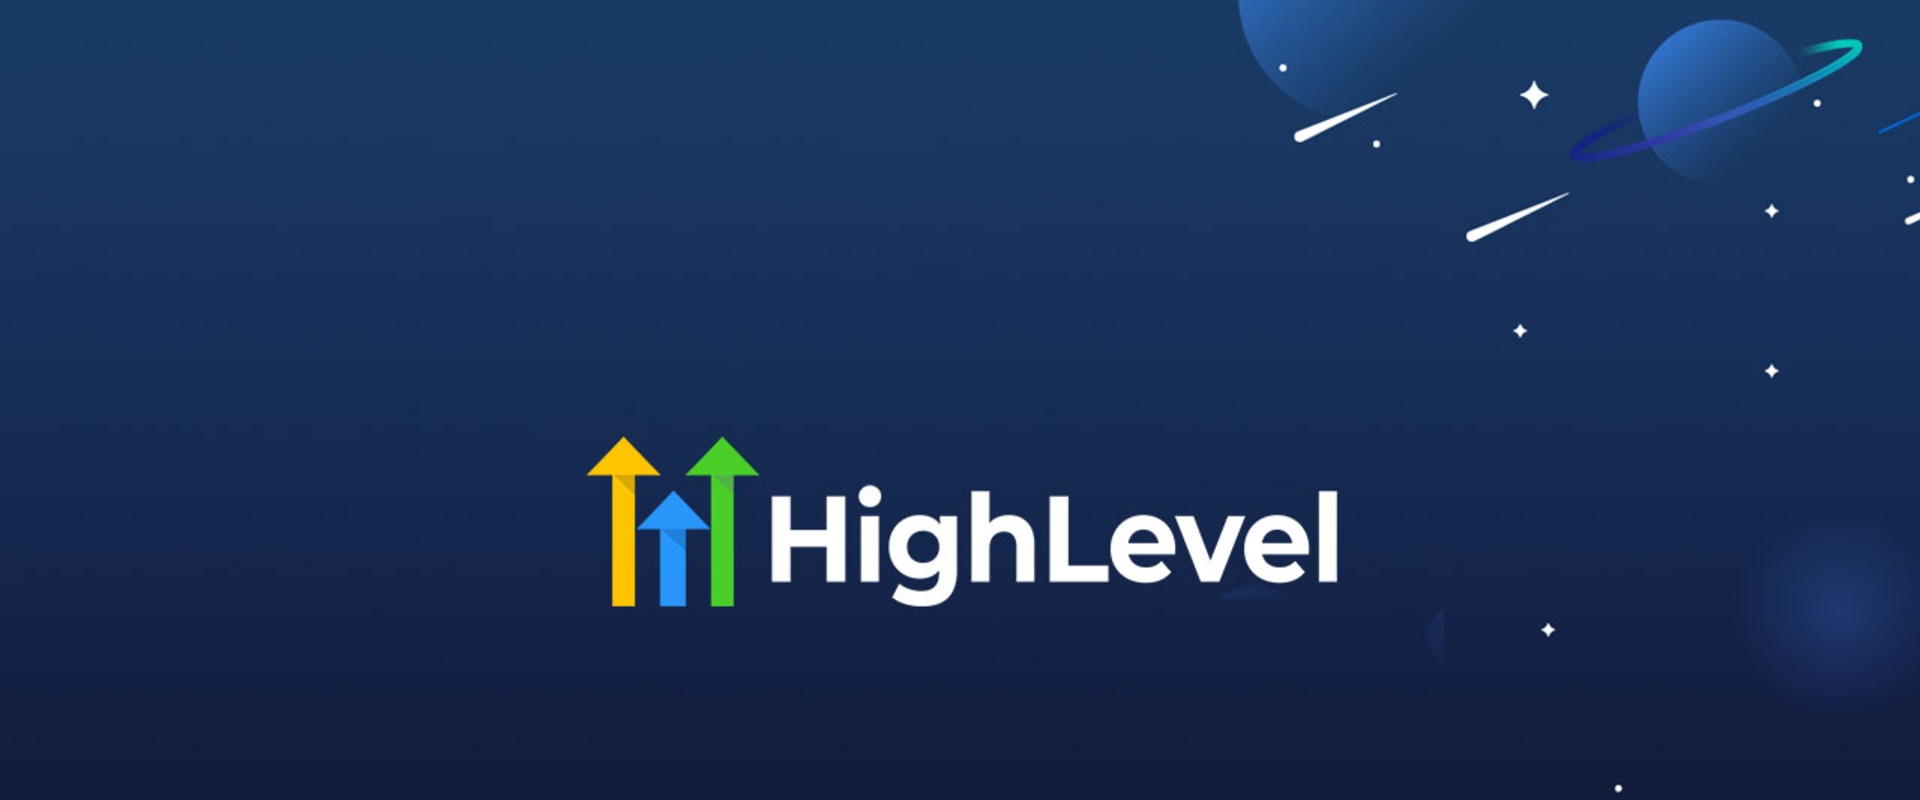 Setting up API Keys for gohighlevel: A Step-by-Step Guide to Automate Your Marketing Processes